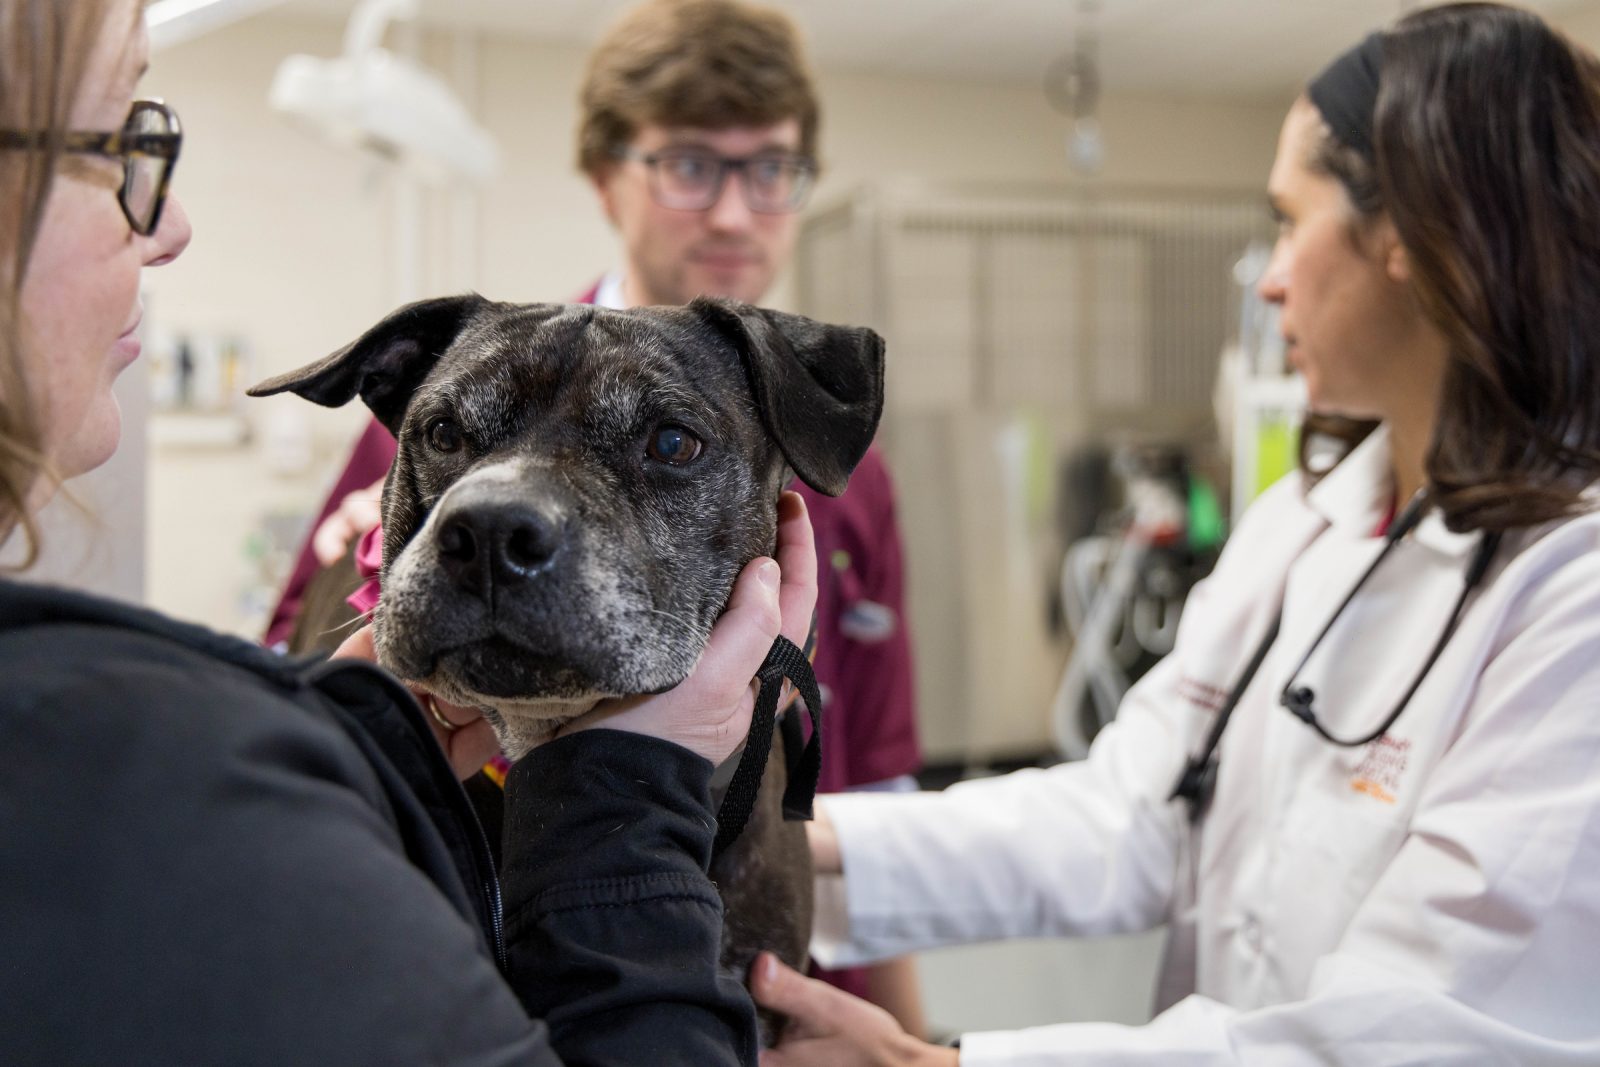 Black dog with salt and pepper muzzle face in the forefront while doctors talk and another gently holds his head.